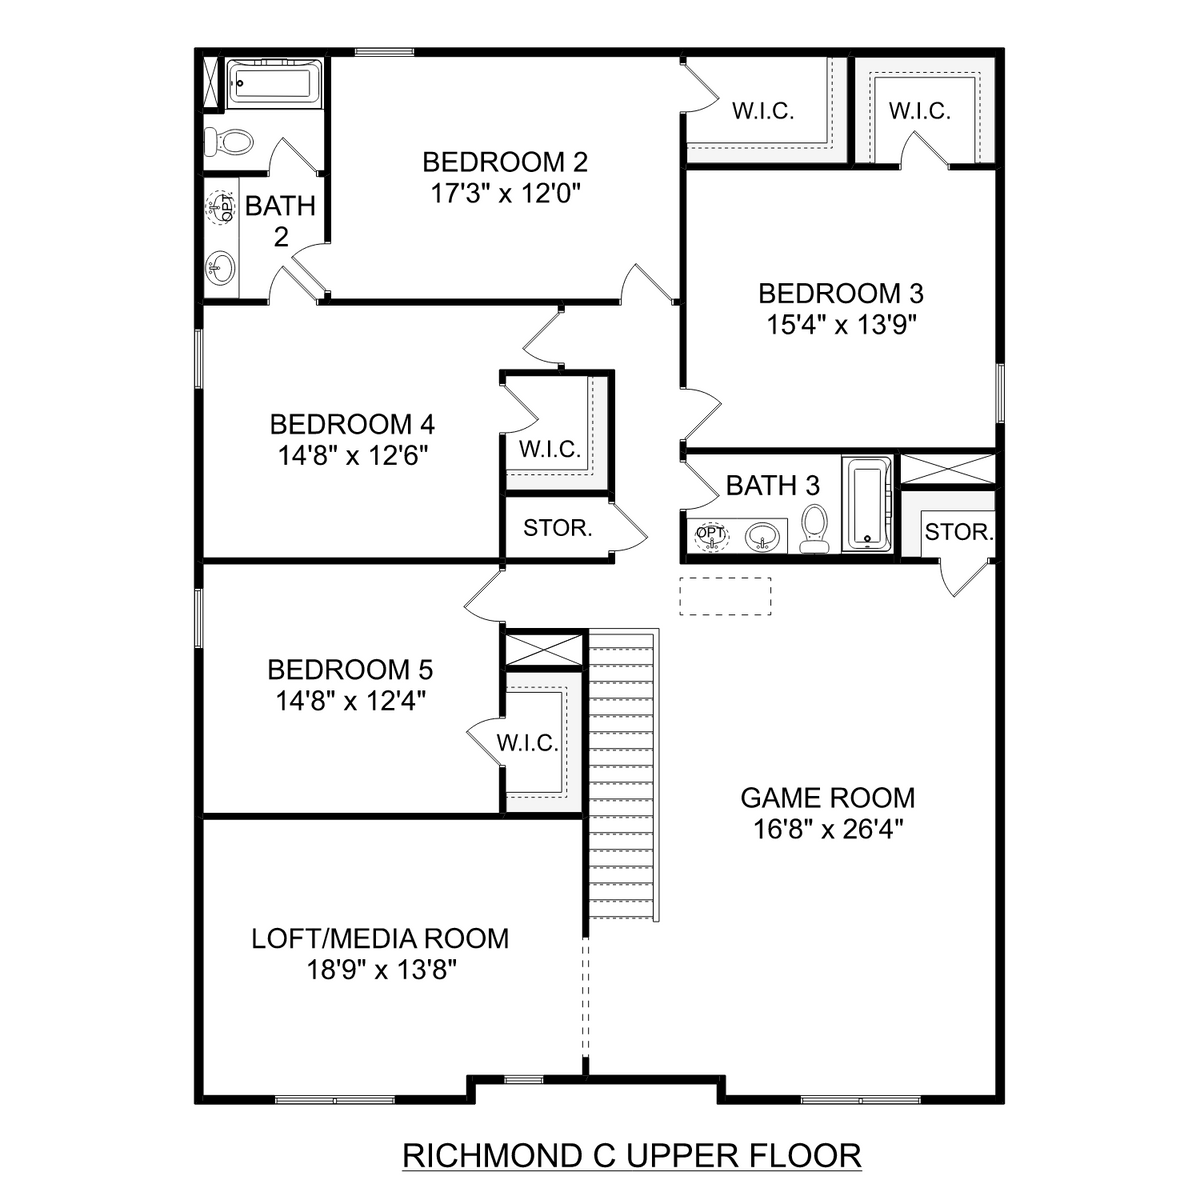 2 - The Richmond C floor plan layout for 4023 Rockland Circle SE in Davidson Homes' Monteagle Cove community.